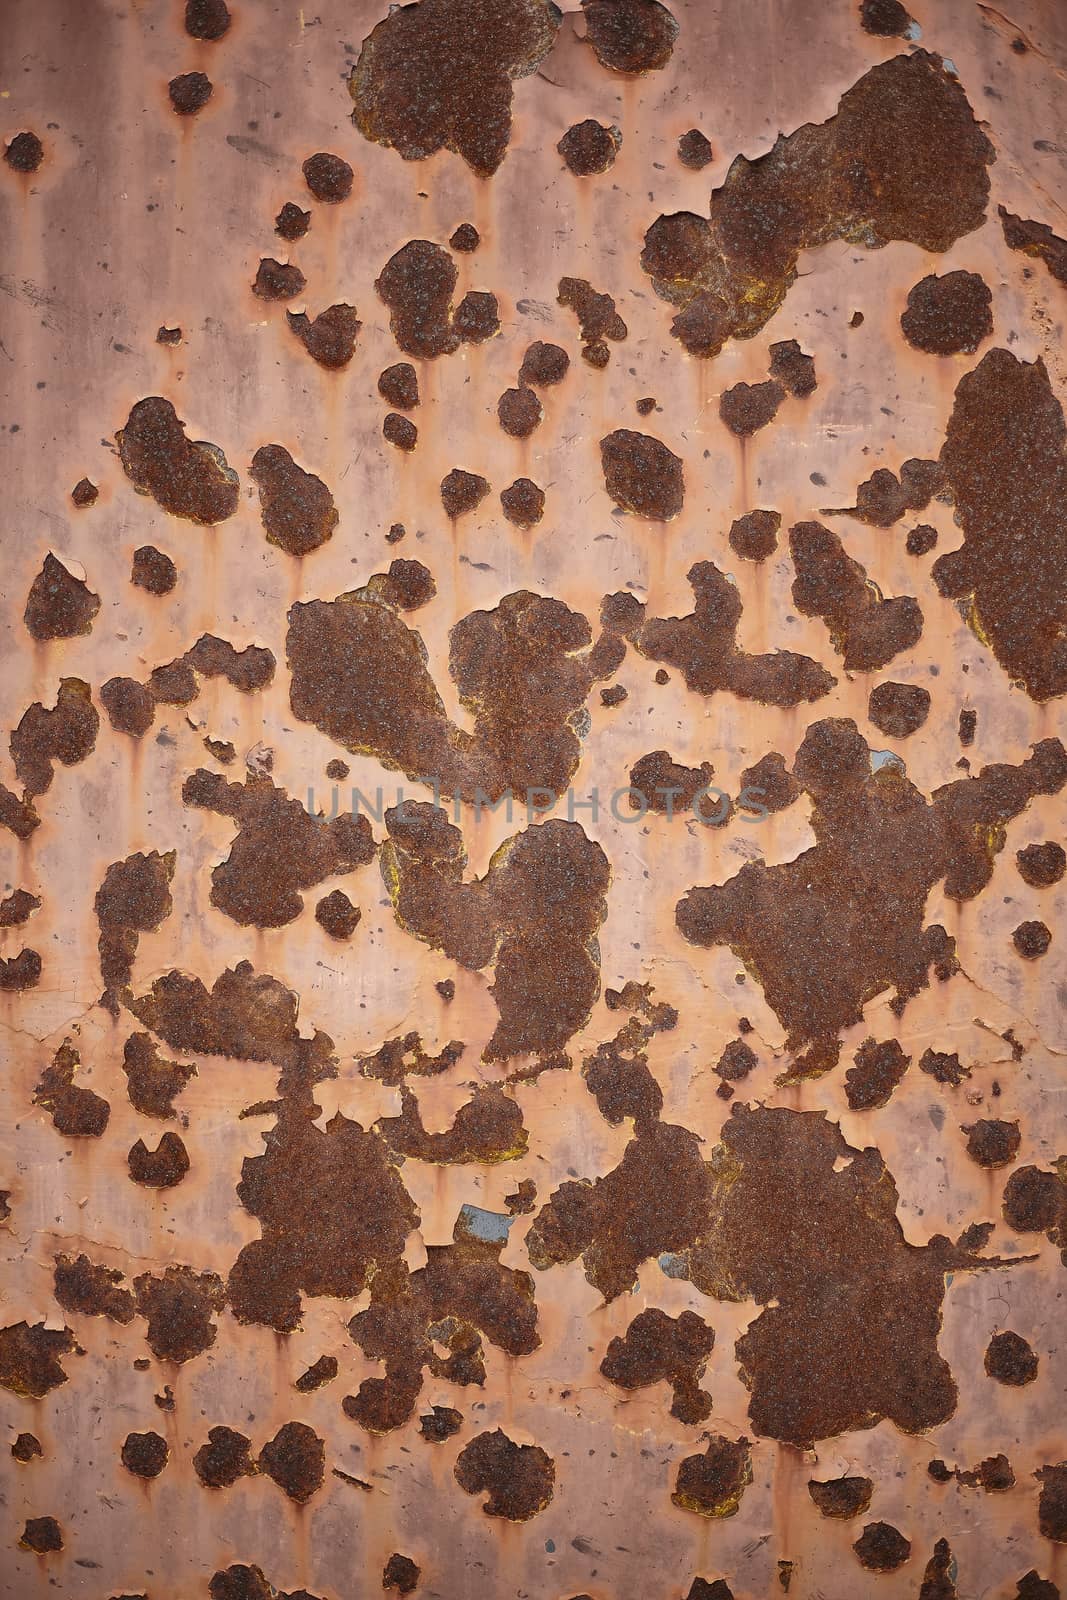 Texture of a rusty metal sheet by pippocarlot